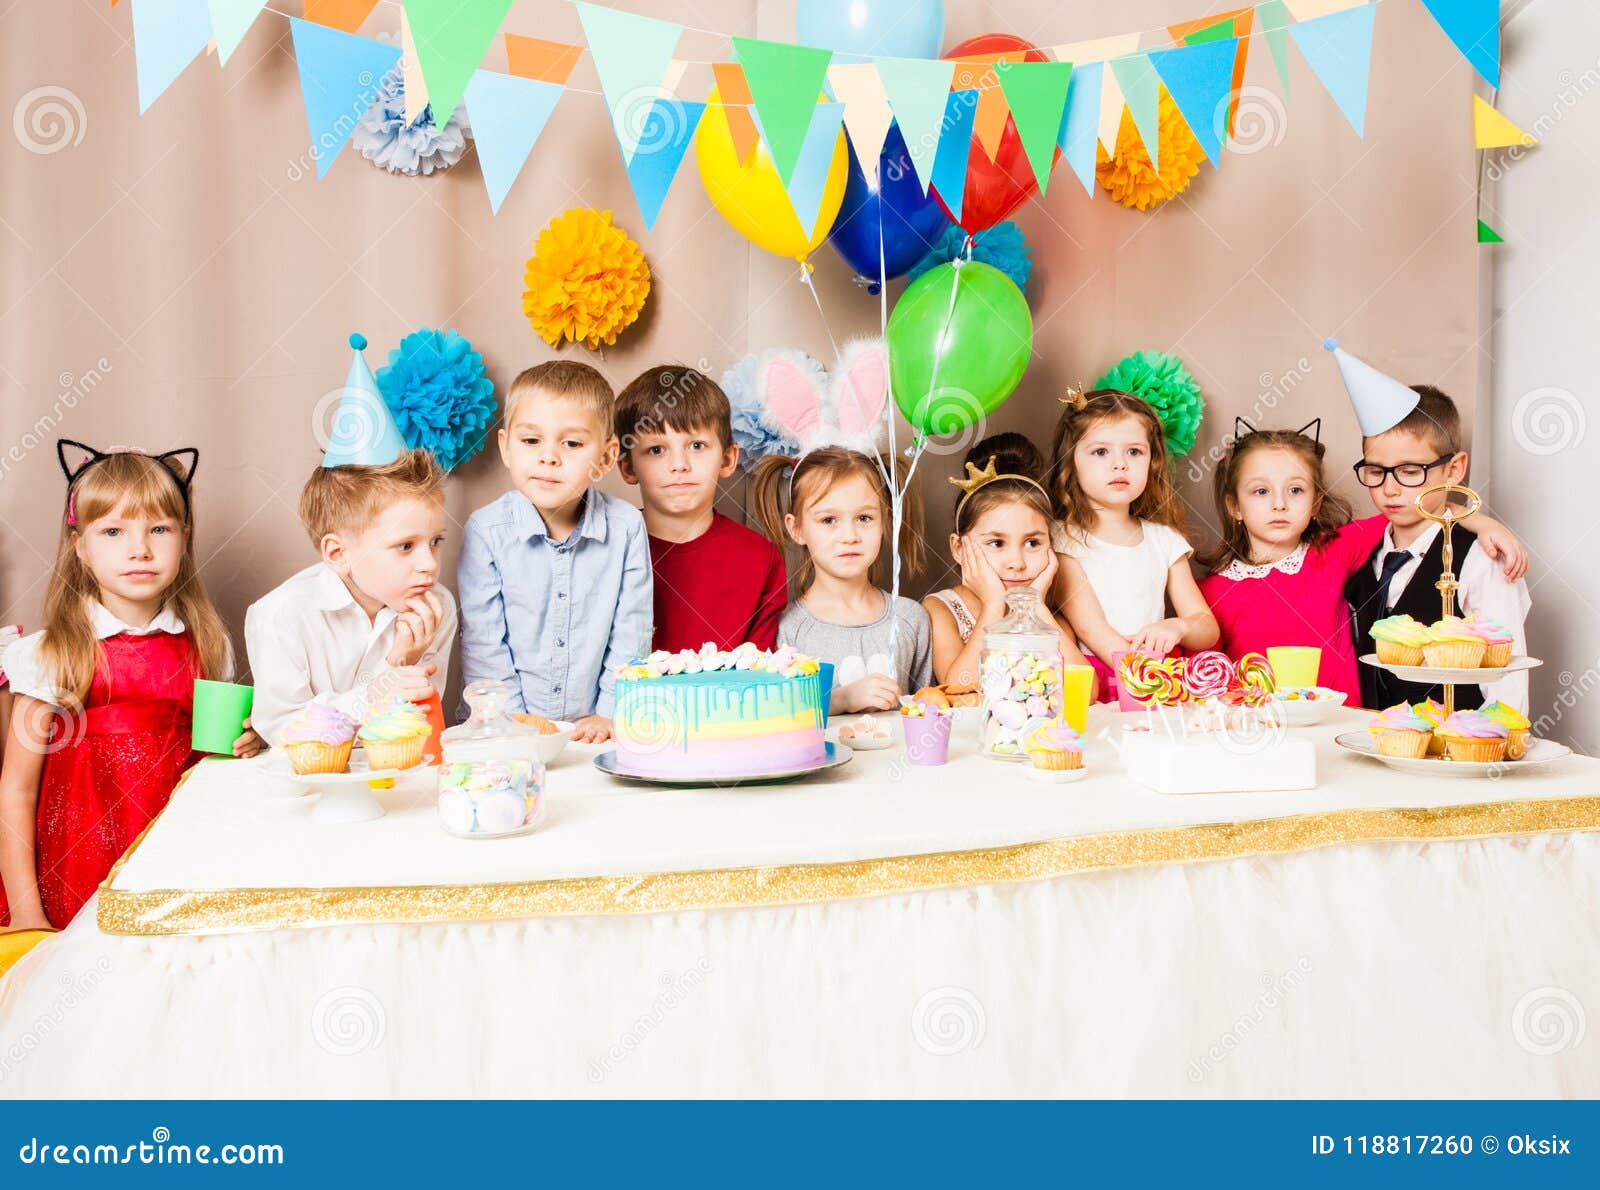 Happy birthday party stock photo. Image of dessert, colorful ...